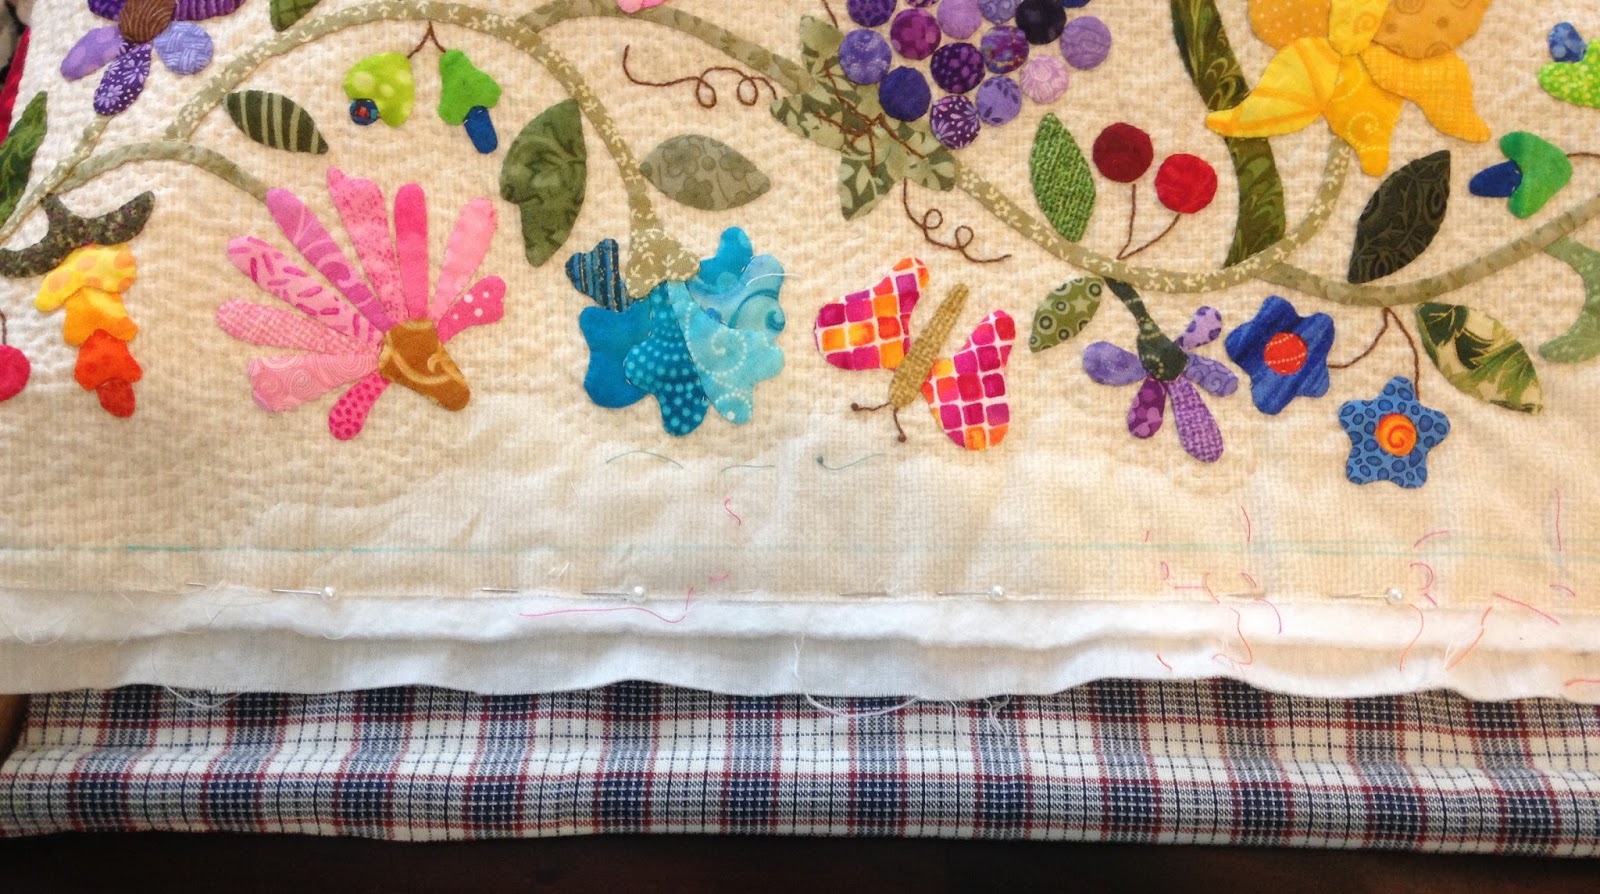 FABRIC THERAPY: Hand quilting with a half hoop